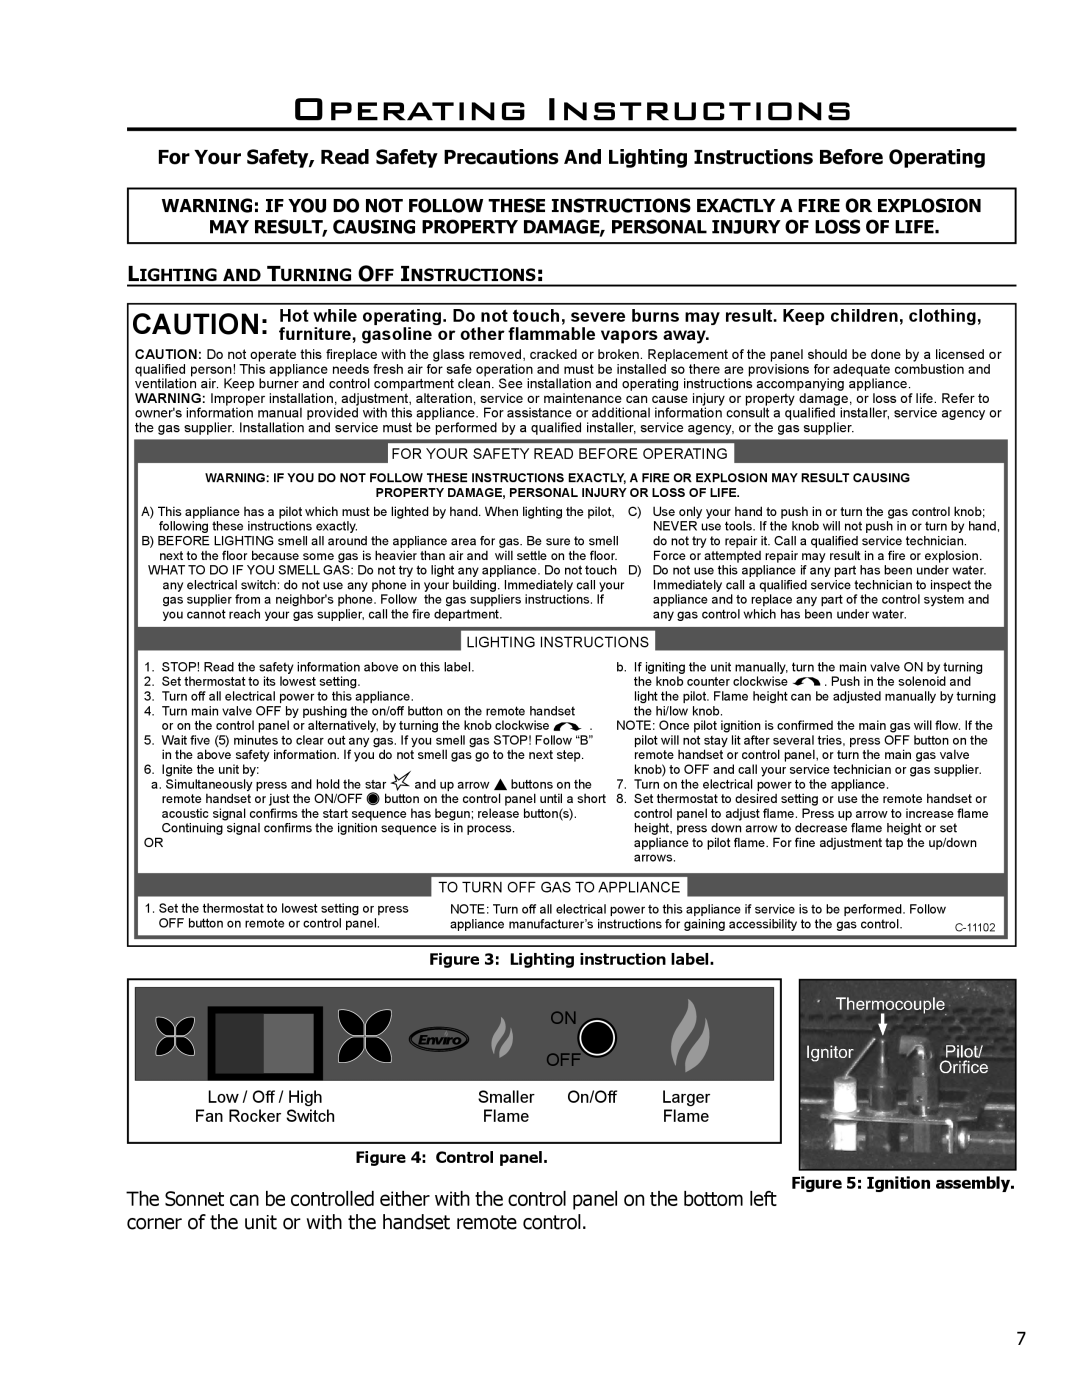 Enviro C-11102 Operating Instructions, Lighting And Turning Off Instructions, On/Off, Larger, Flame, Control panel 